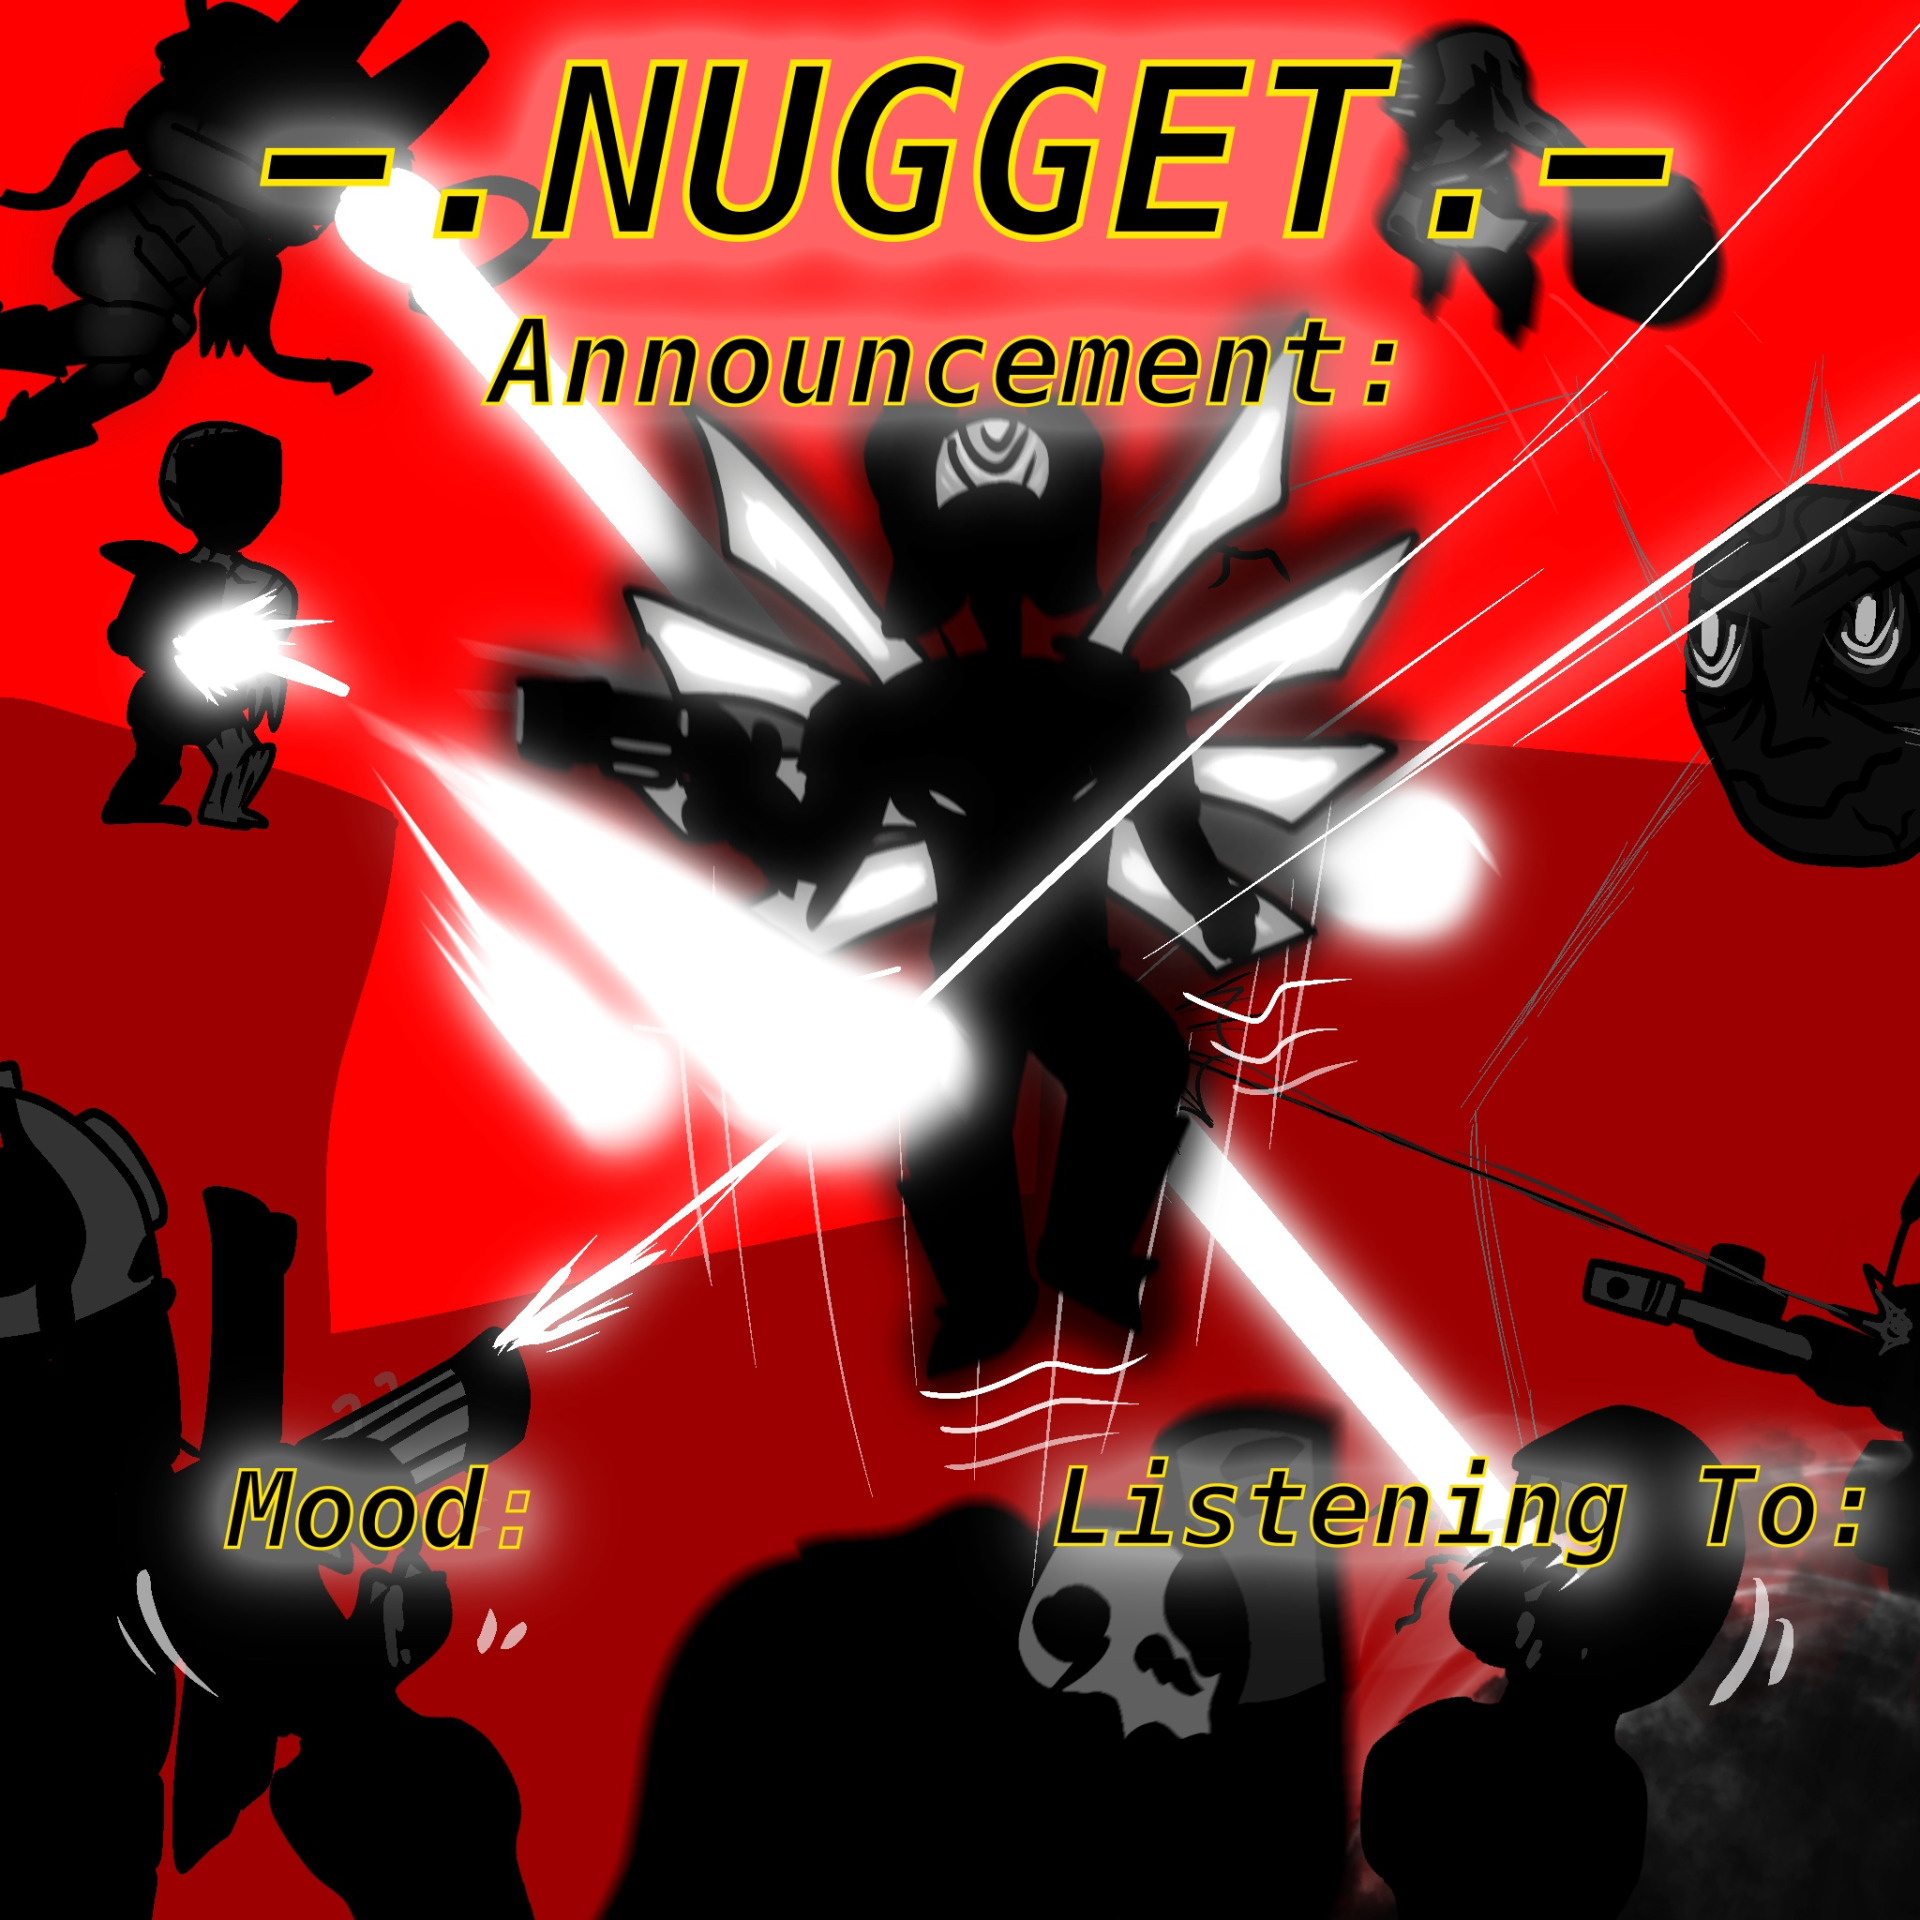 High Quality nugget’s super awesome announcement template Blank Meme Template